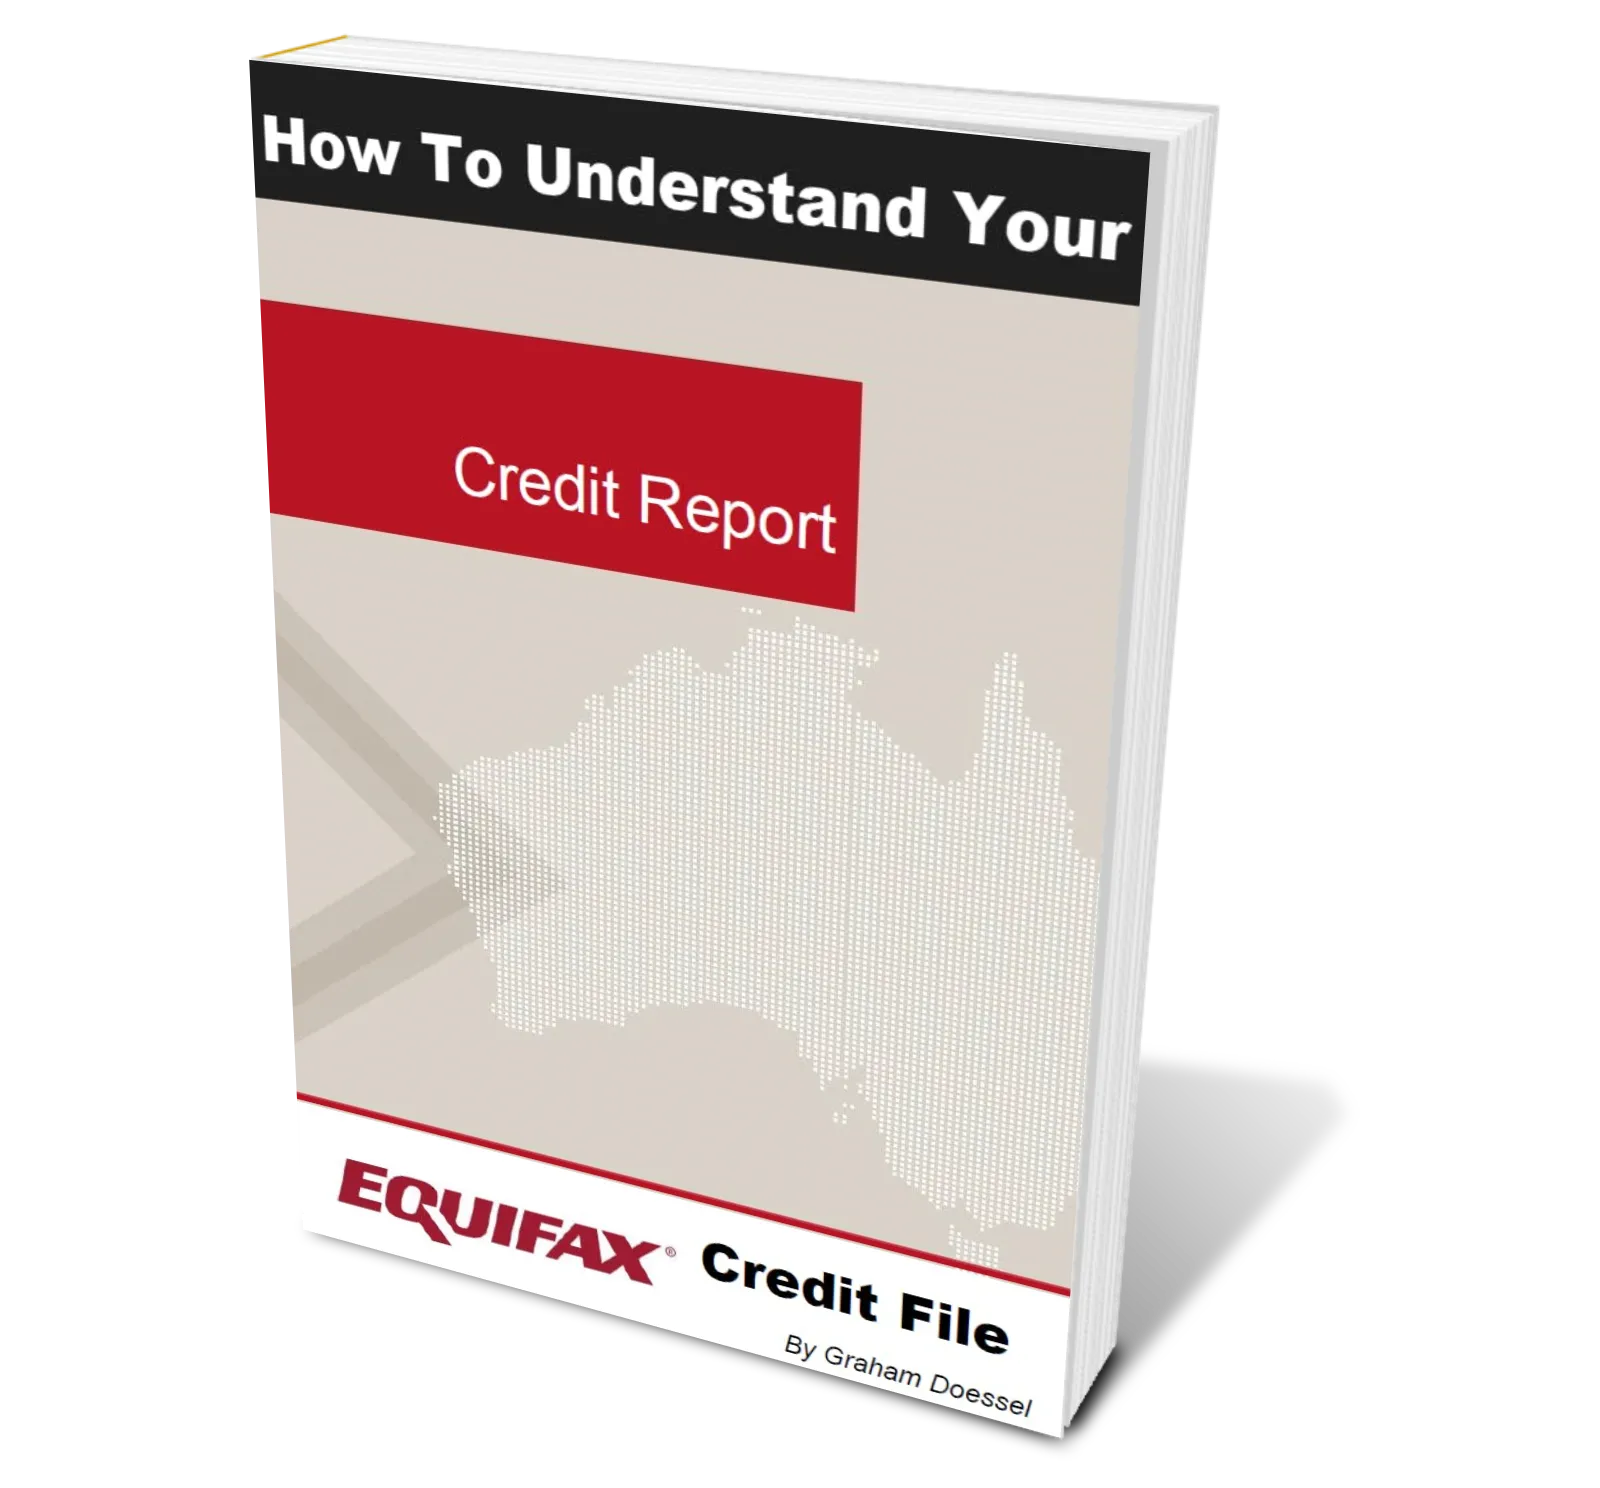 How To Understand Your Equifax Credit File